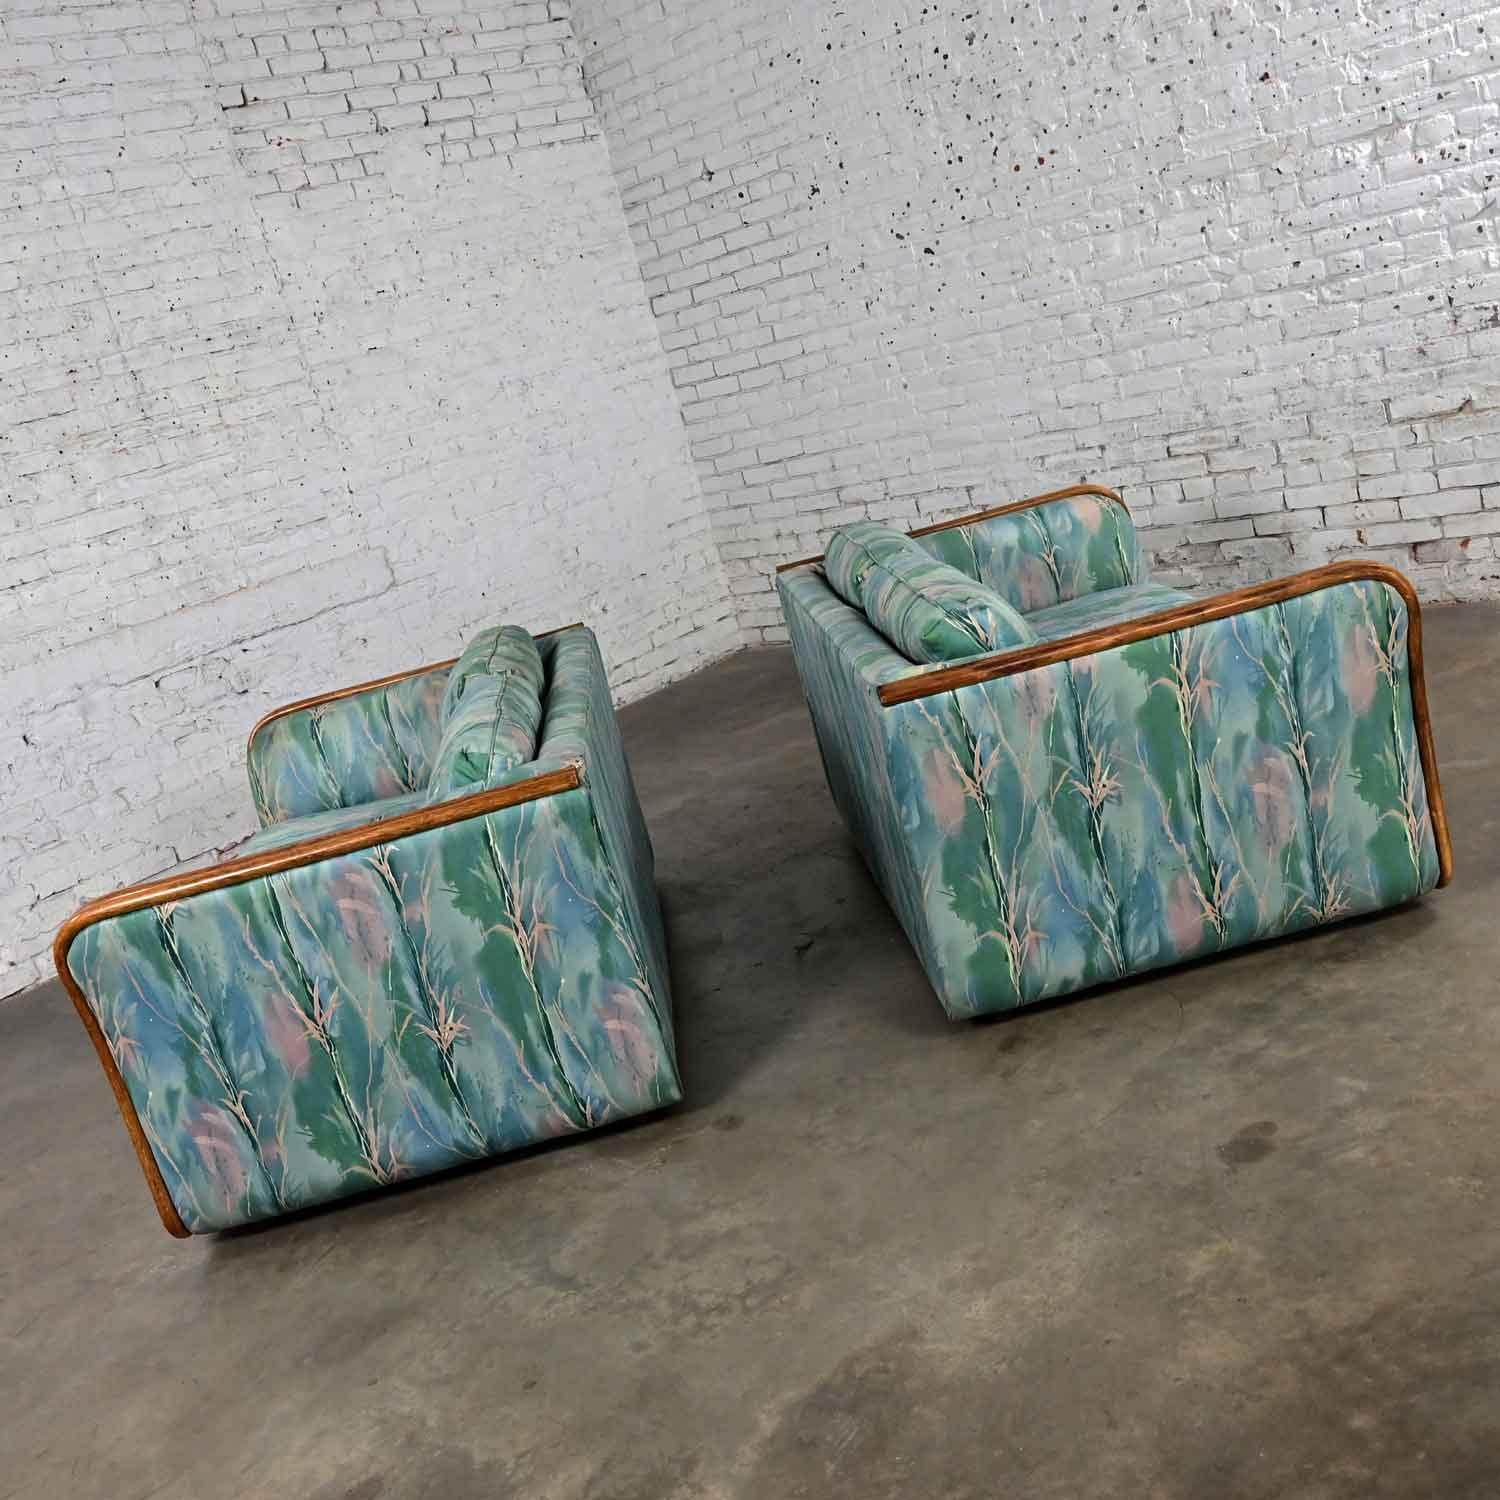 Fabric Late 20th Century Boho Chic Rattan & Wicker Tuxedo Style Upholstered Loveseats For Sale